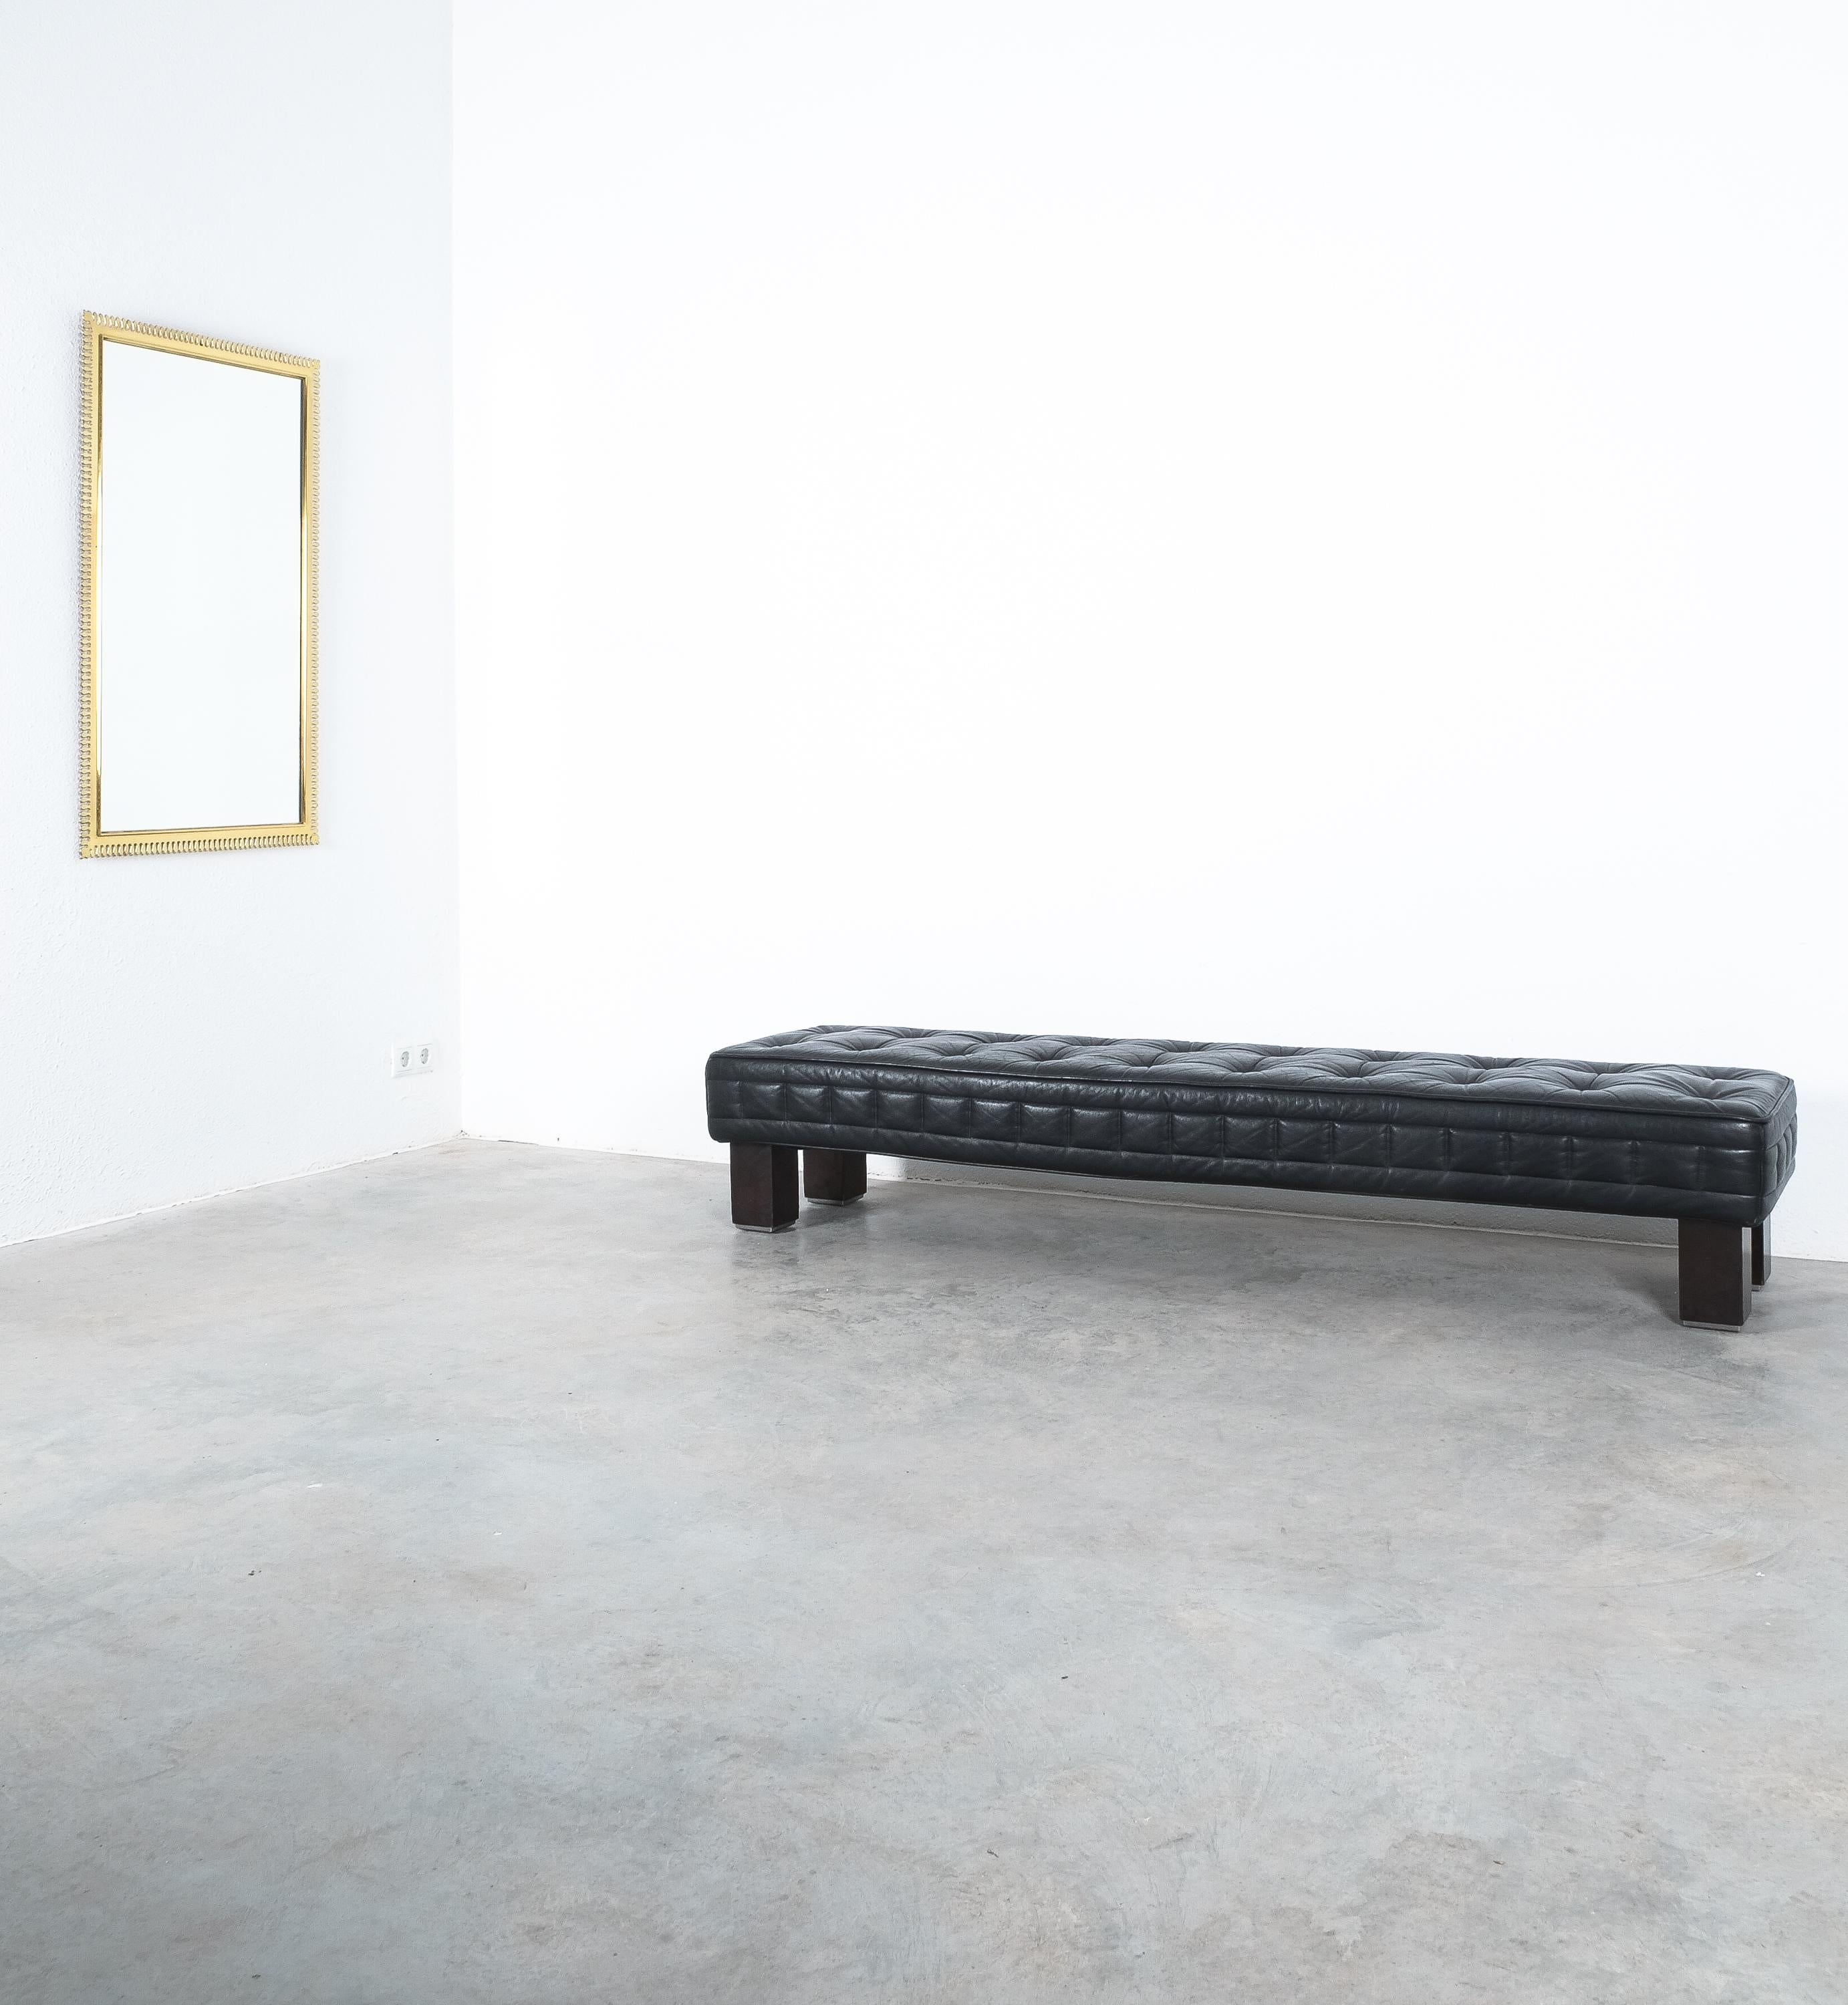 Matteo Thun Tufted Black Leather Banquettes (2 pieces) Bench Materassi, Wittmann For Sale 2